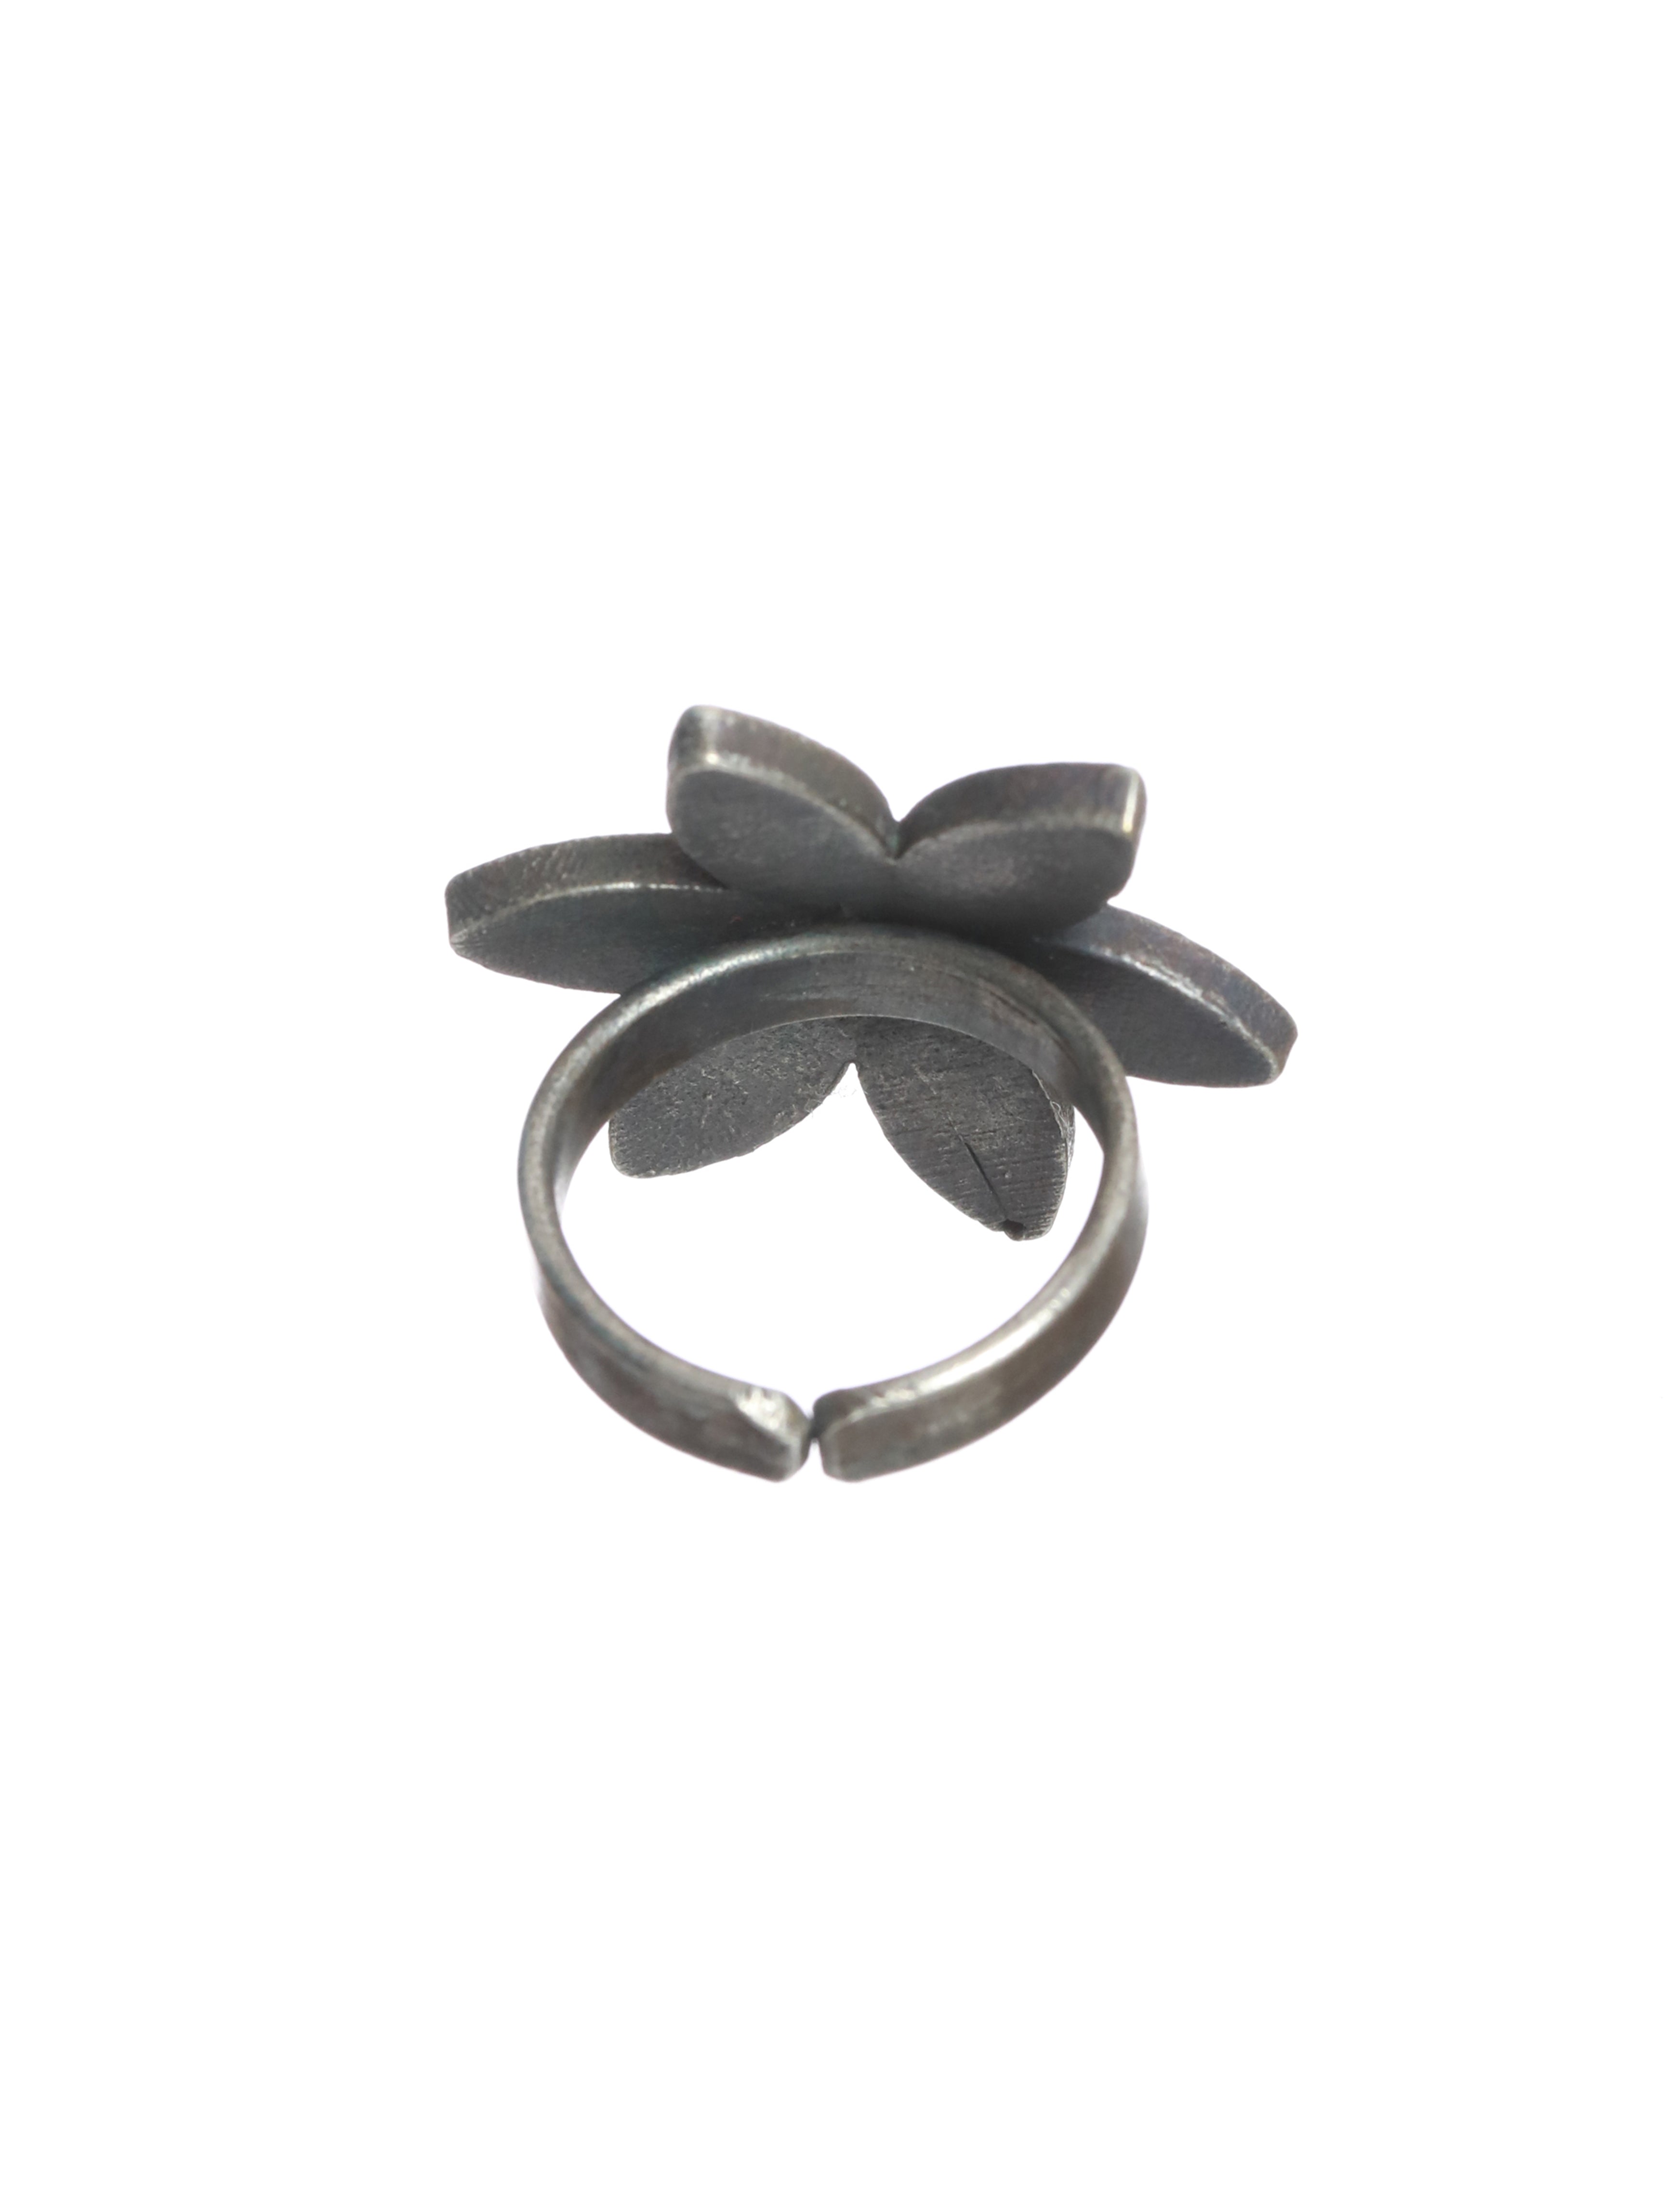 Oxidised Floral-Shaped Silver-Plated Adjustable Finger Ring - Jazzandsizzle